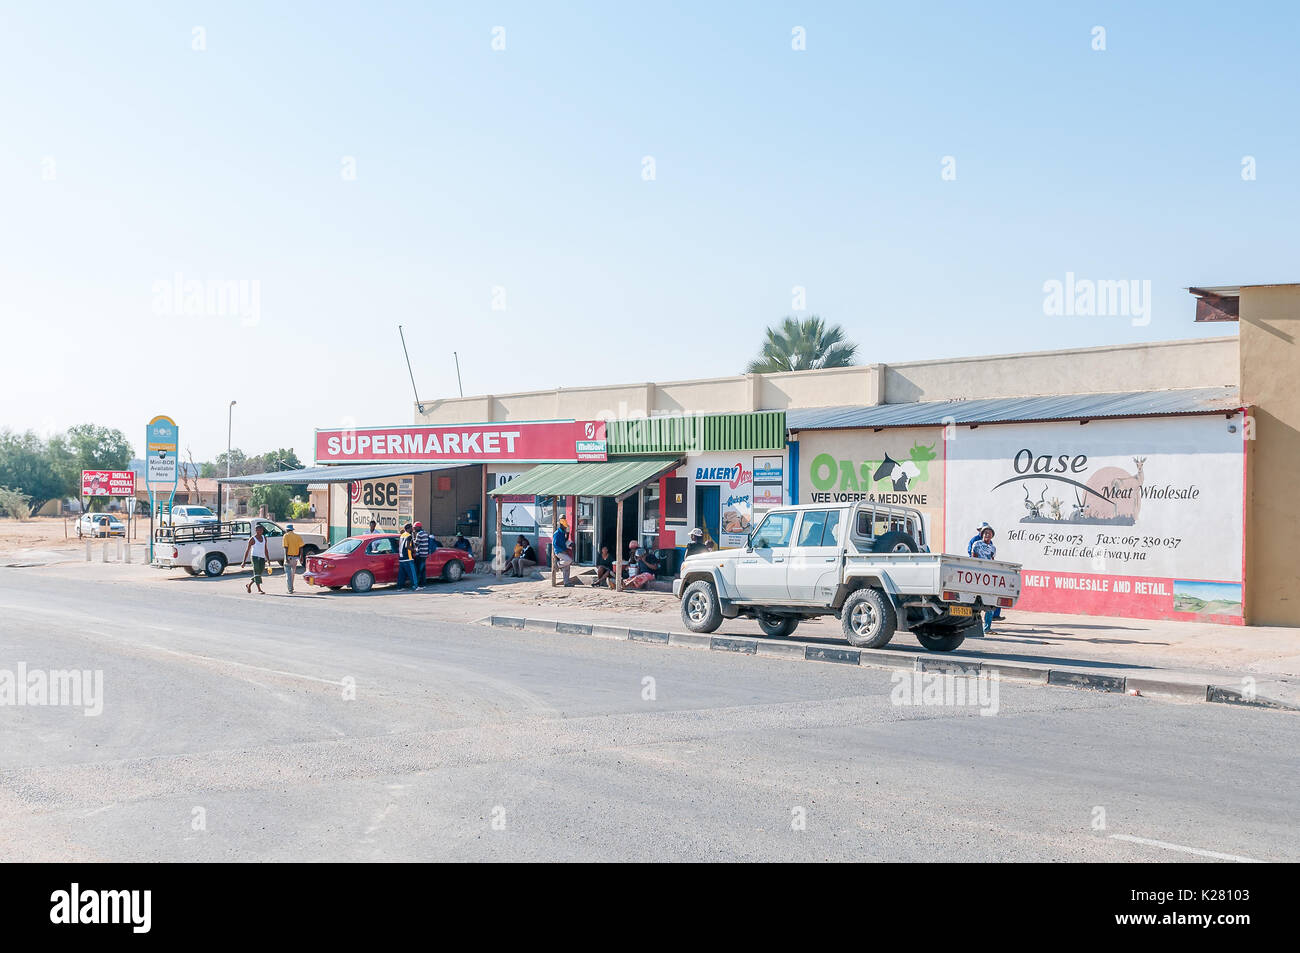 KAMANJAB, NAMIBIA - JUNE 27, 2017: A street scene with businesses and vehicles in Kamanjab, a small town in the Kunene Region of Namibia Stock Photo